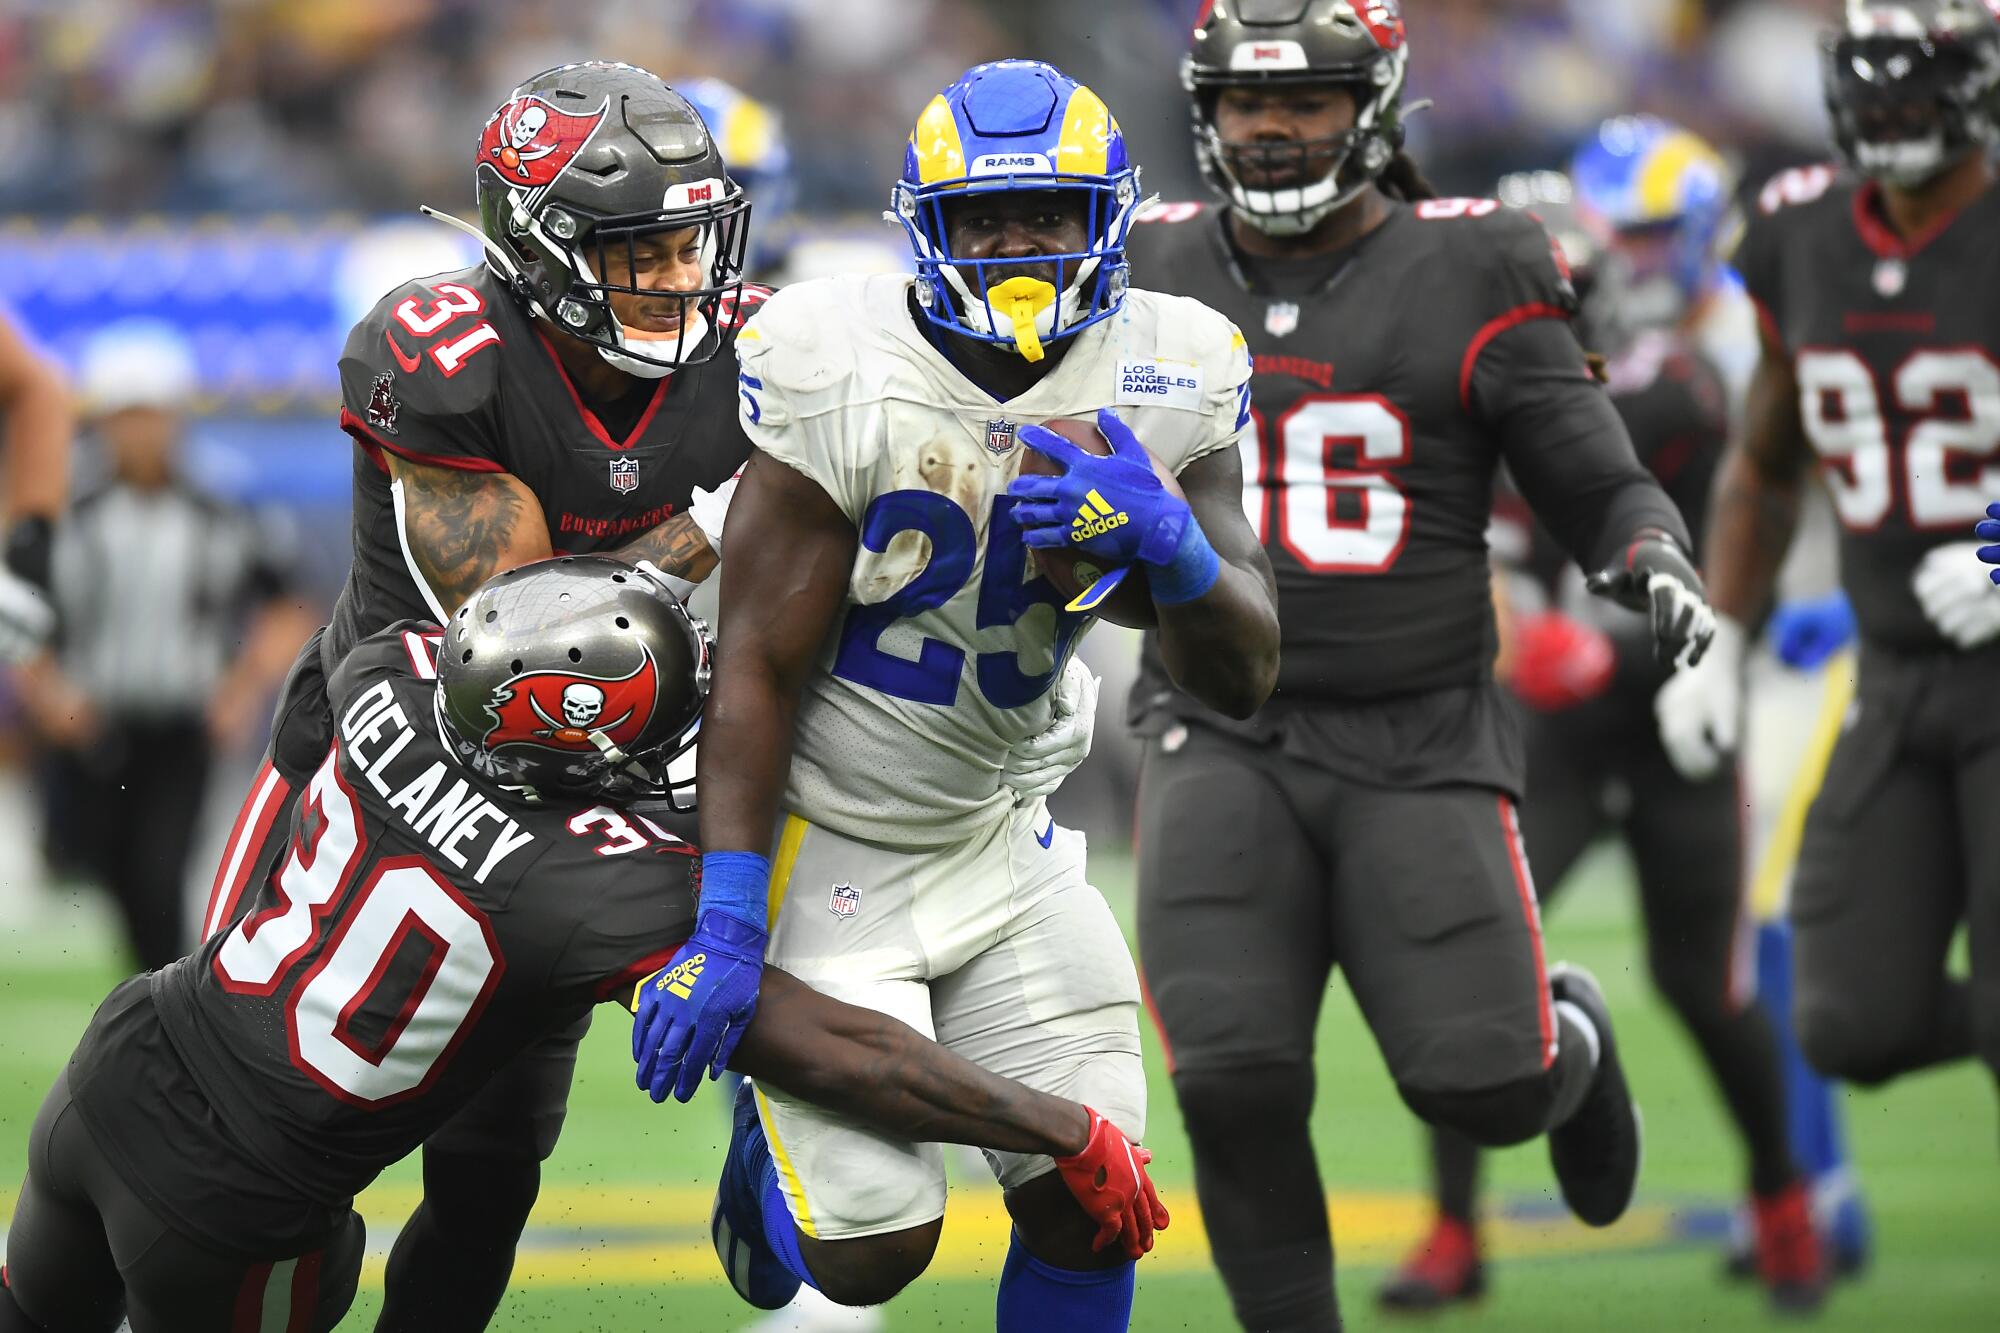 Live updates: Bucs trail from start in loss to Rams